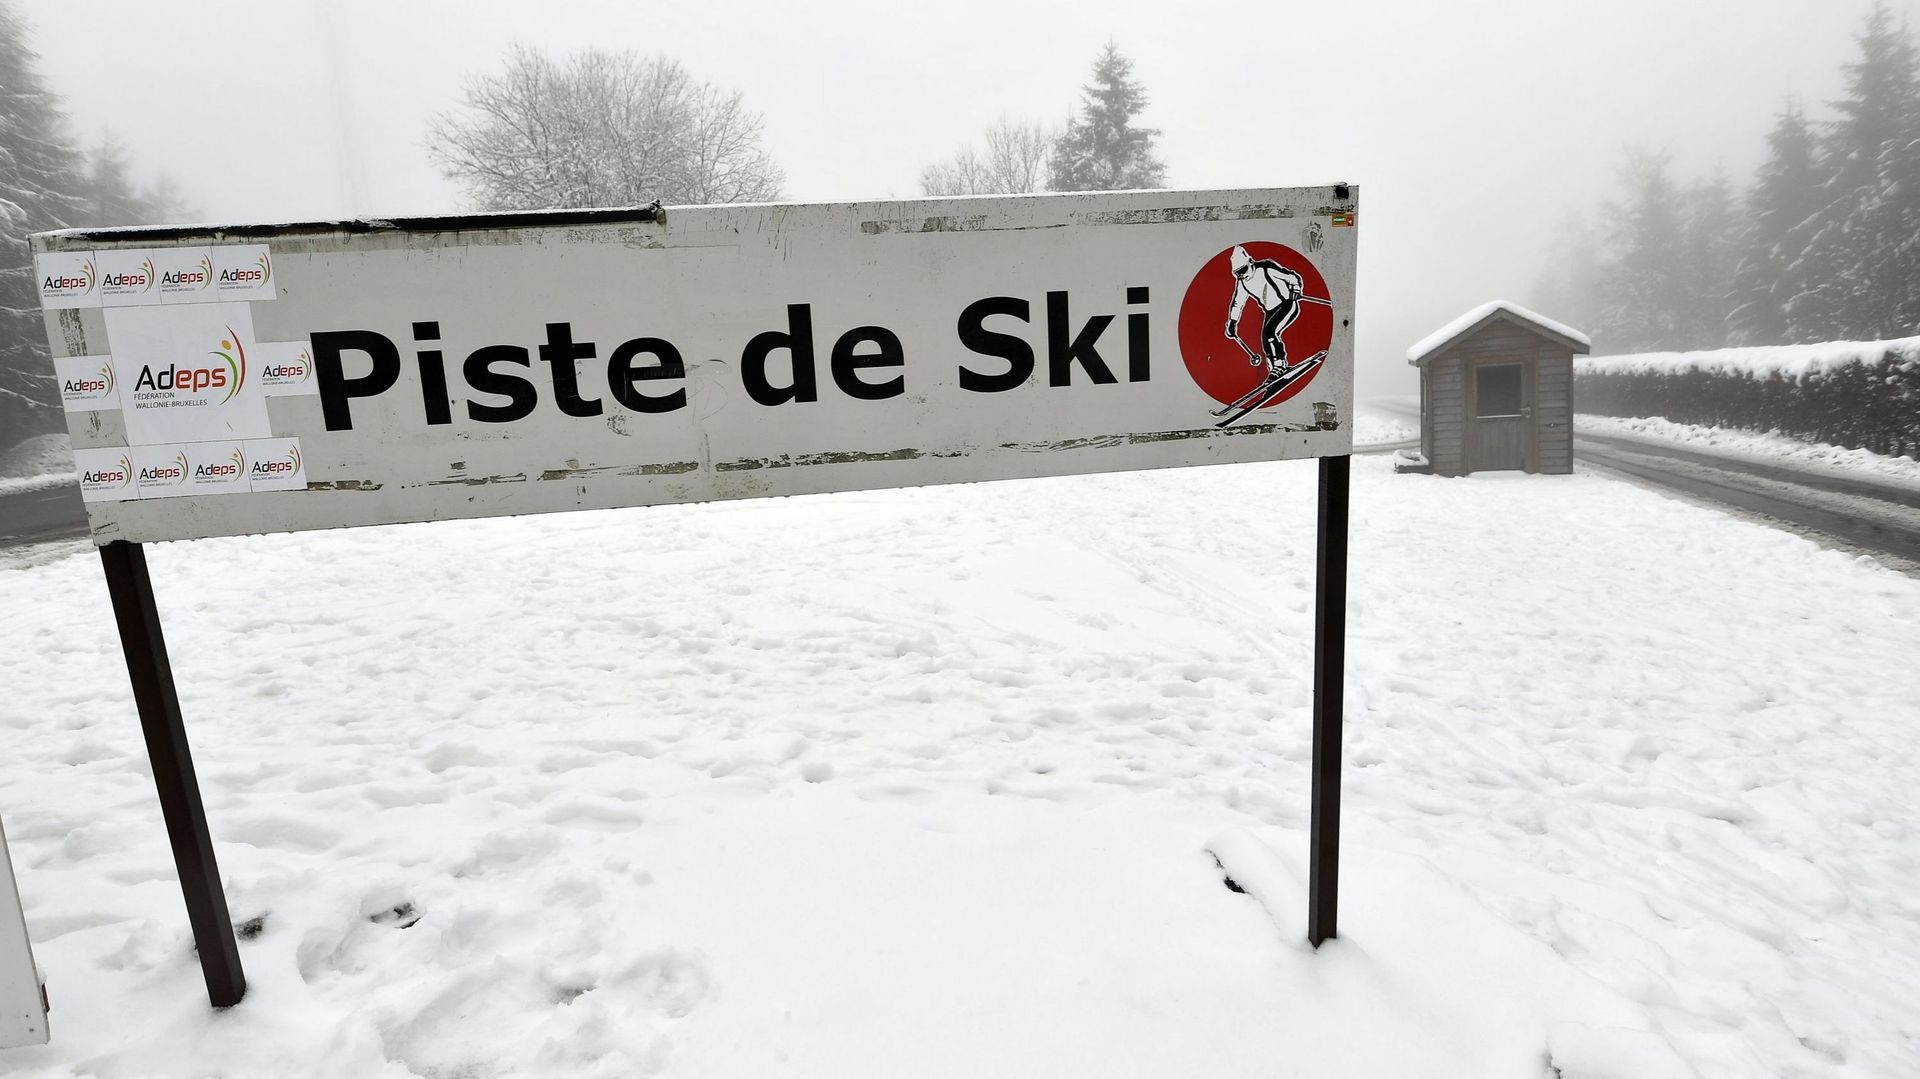 Alpine ski slope run (Adeps center) covered with snow in the beginning of December, Friday 13 January 2017, in Baraque de Fraiture, Luxembourg province. 